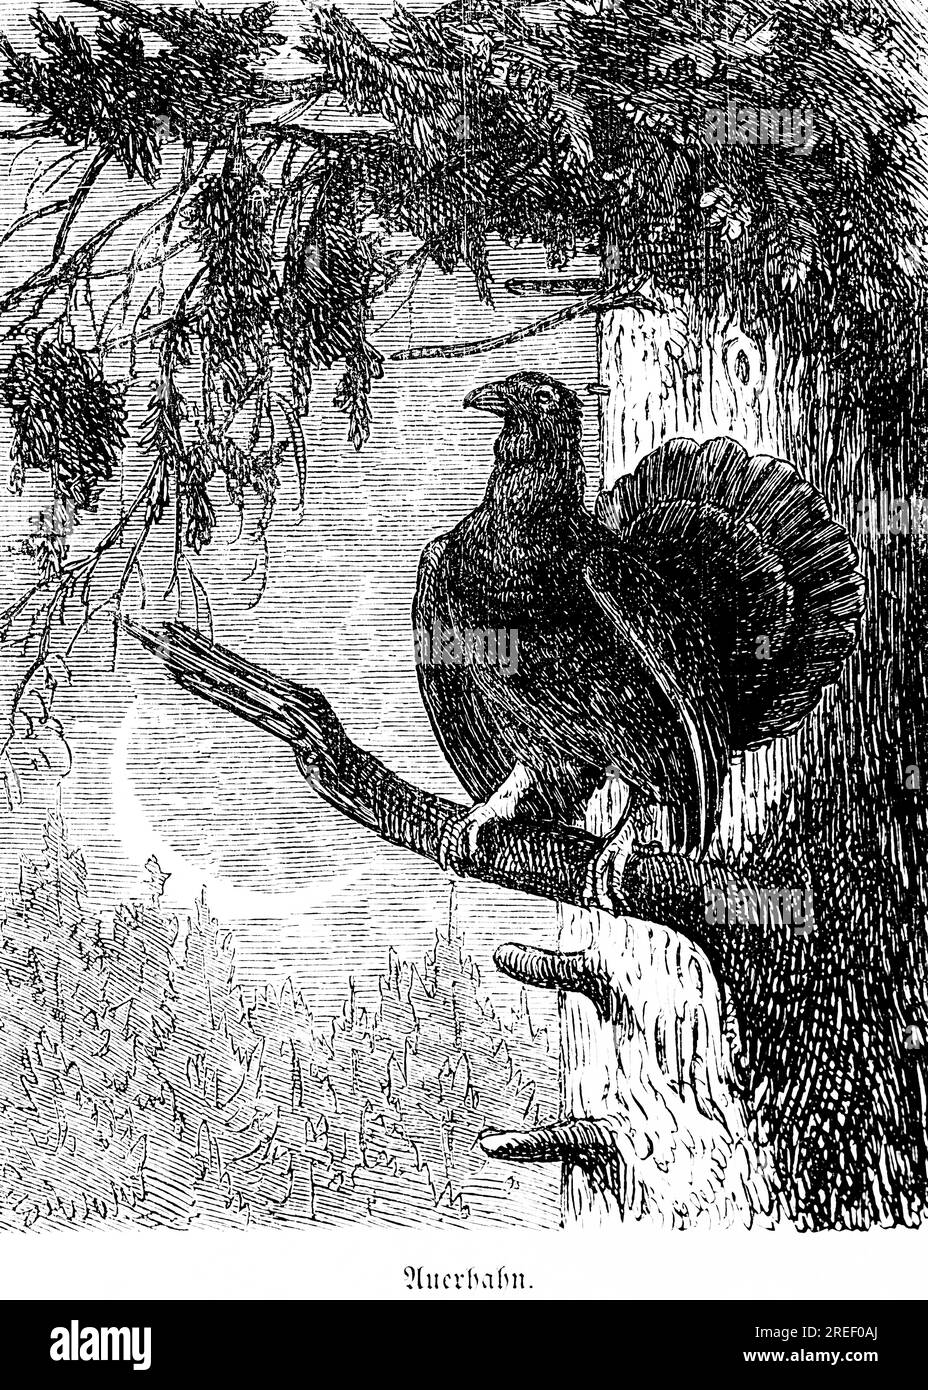 Capercaillie, Hubertus hunting and hunting scenes, wild animals, conifer, branch, crescent moon, sweep dress, sitting, beak, claws, nature Stock Photo